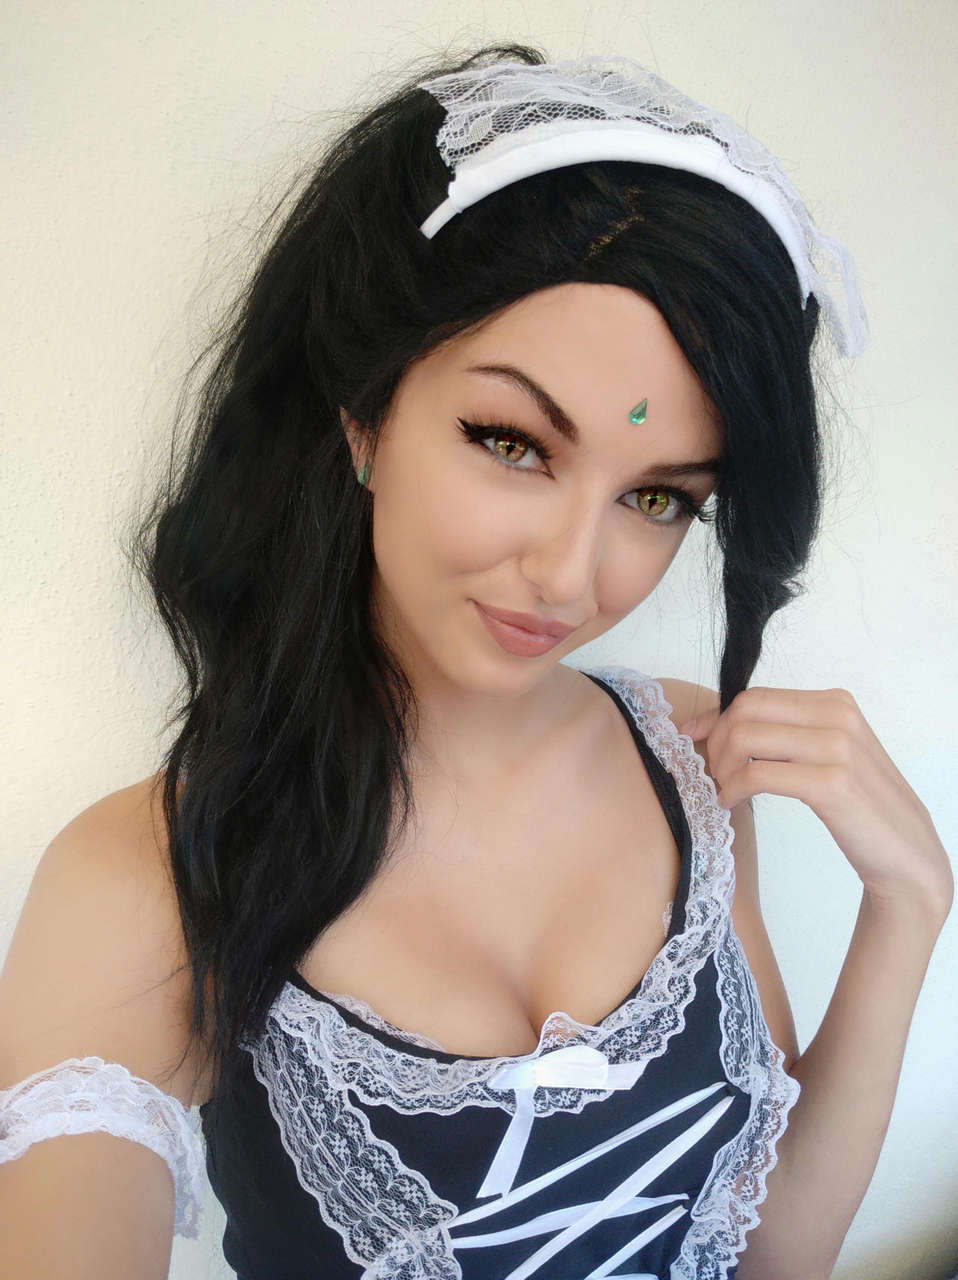 French Maid Nidalee By Missessummone